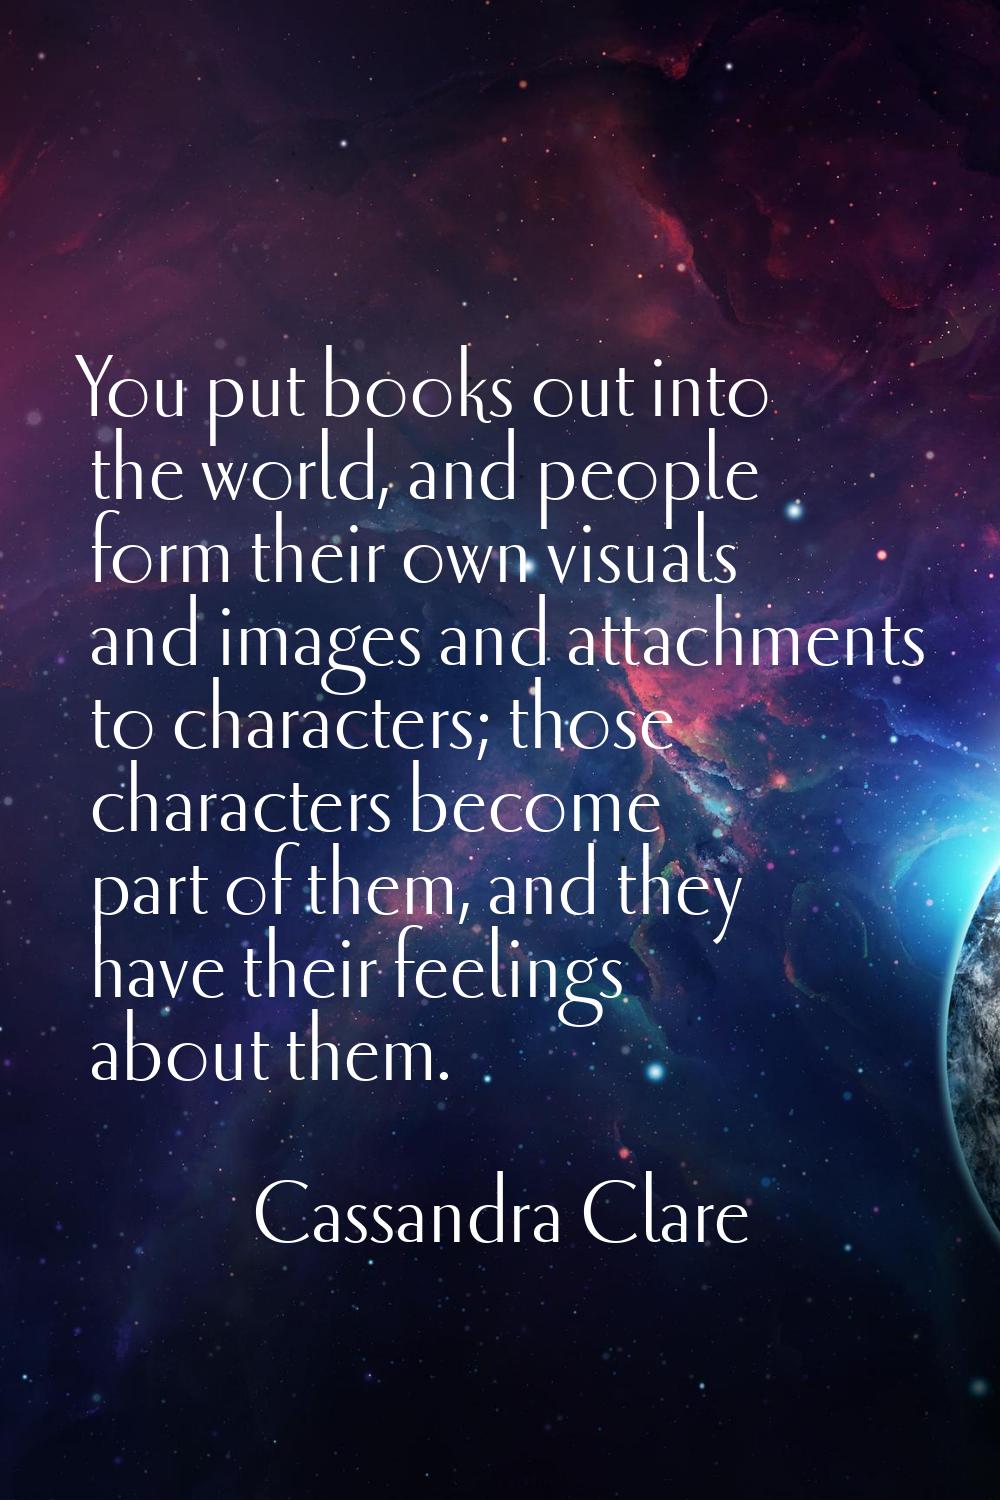 You put books out into the world, and people form their own visuals and images and attachments to c